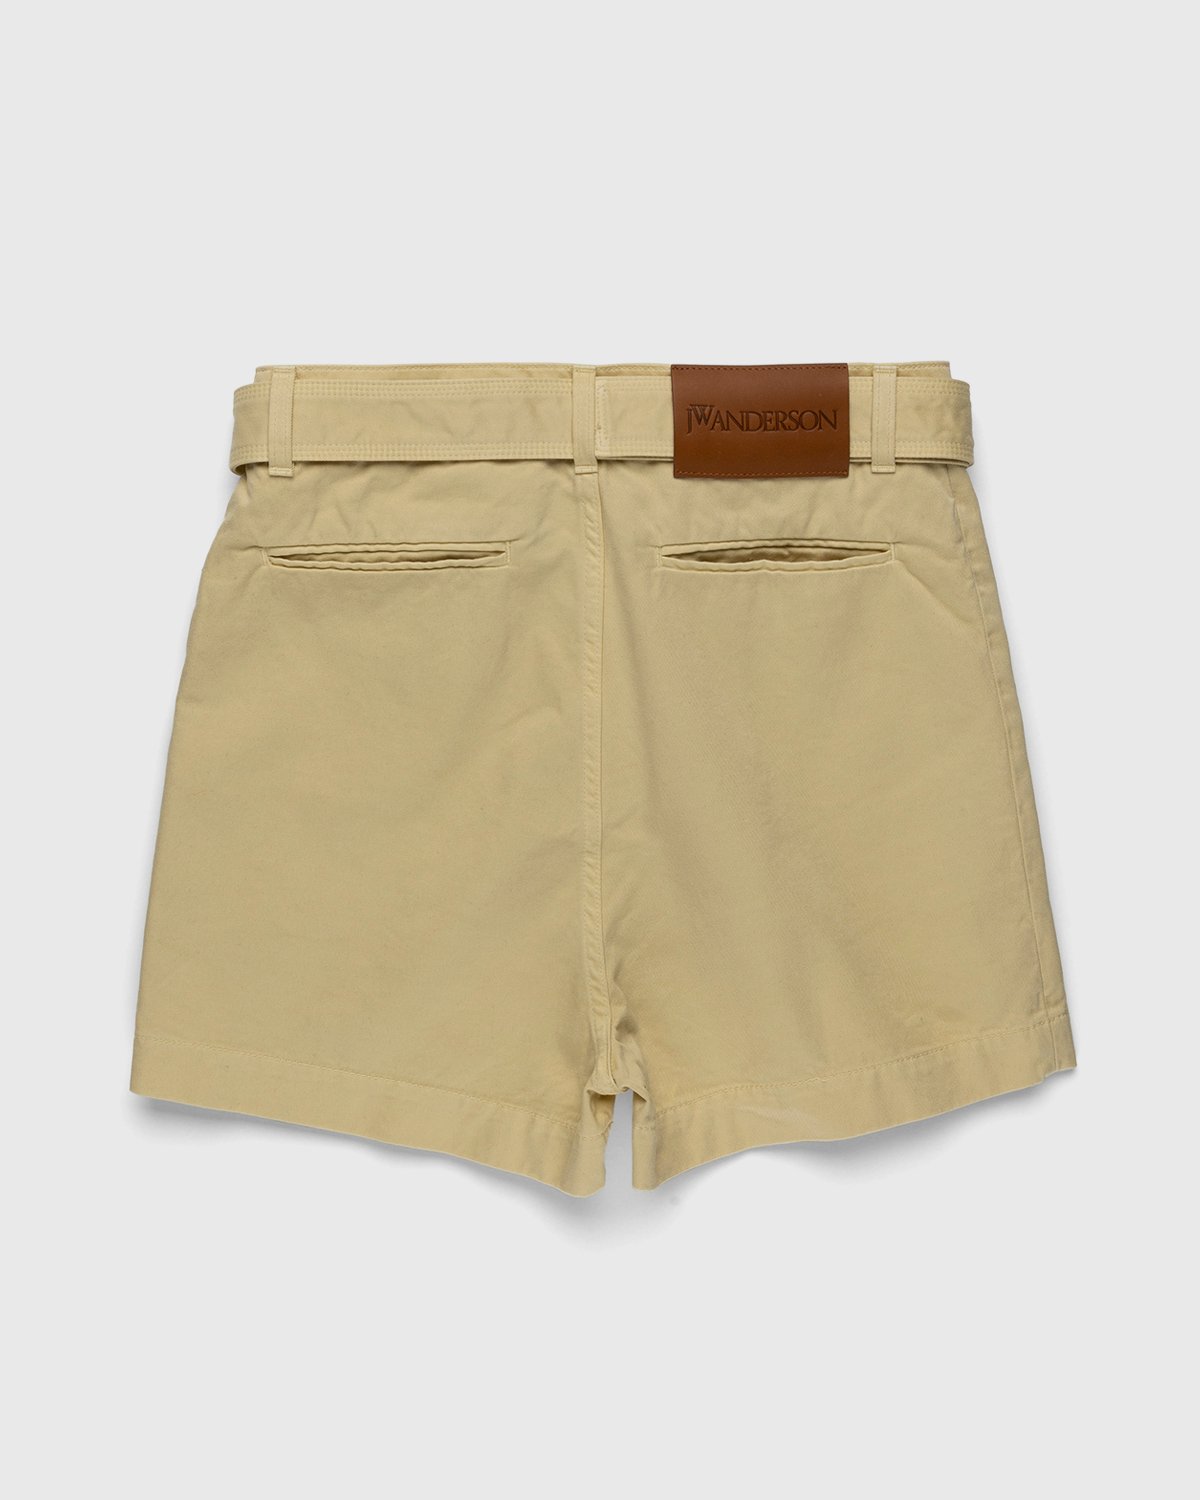 J.W. Anderson - Strawberry Chino Shorts Natural/Red - Clothing - Beige - Image 2